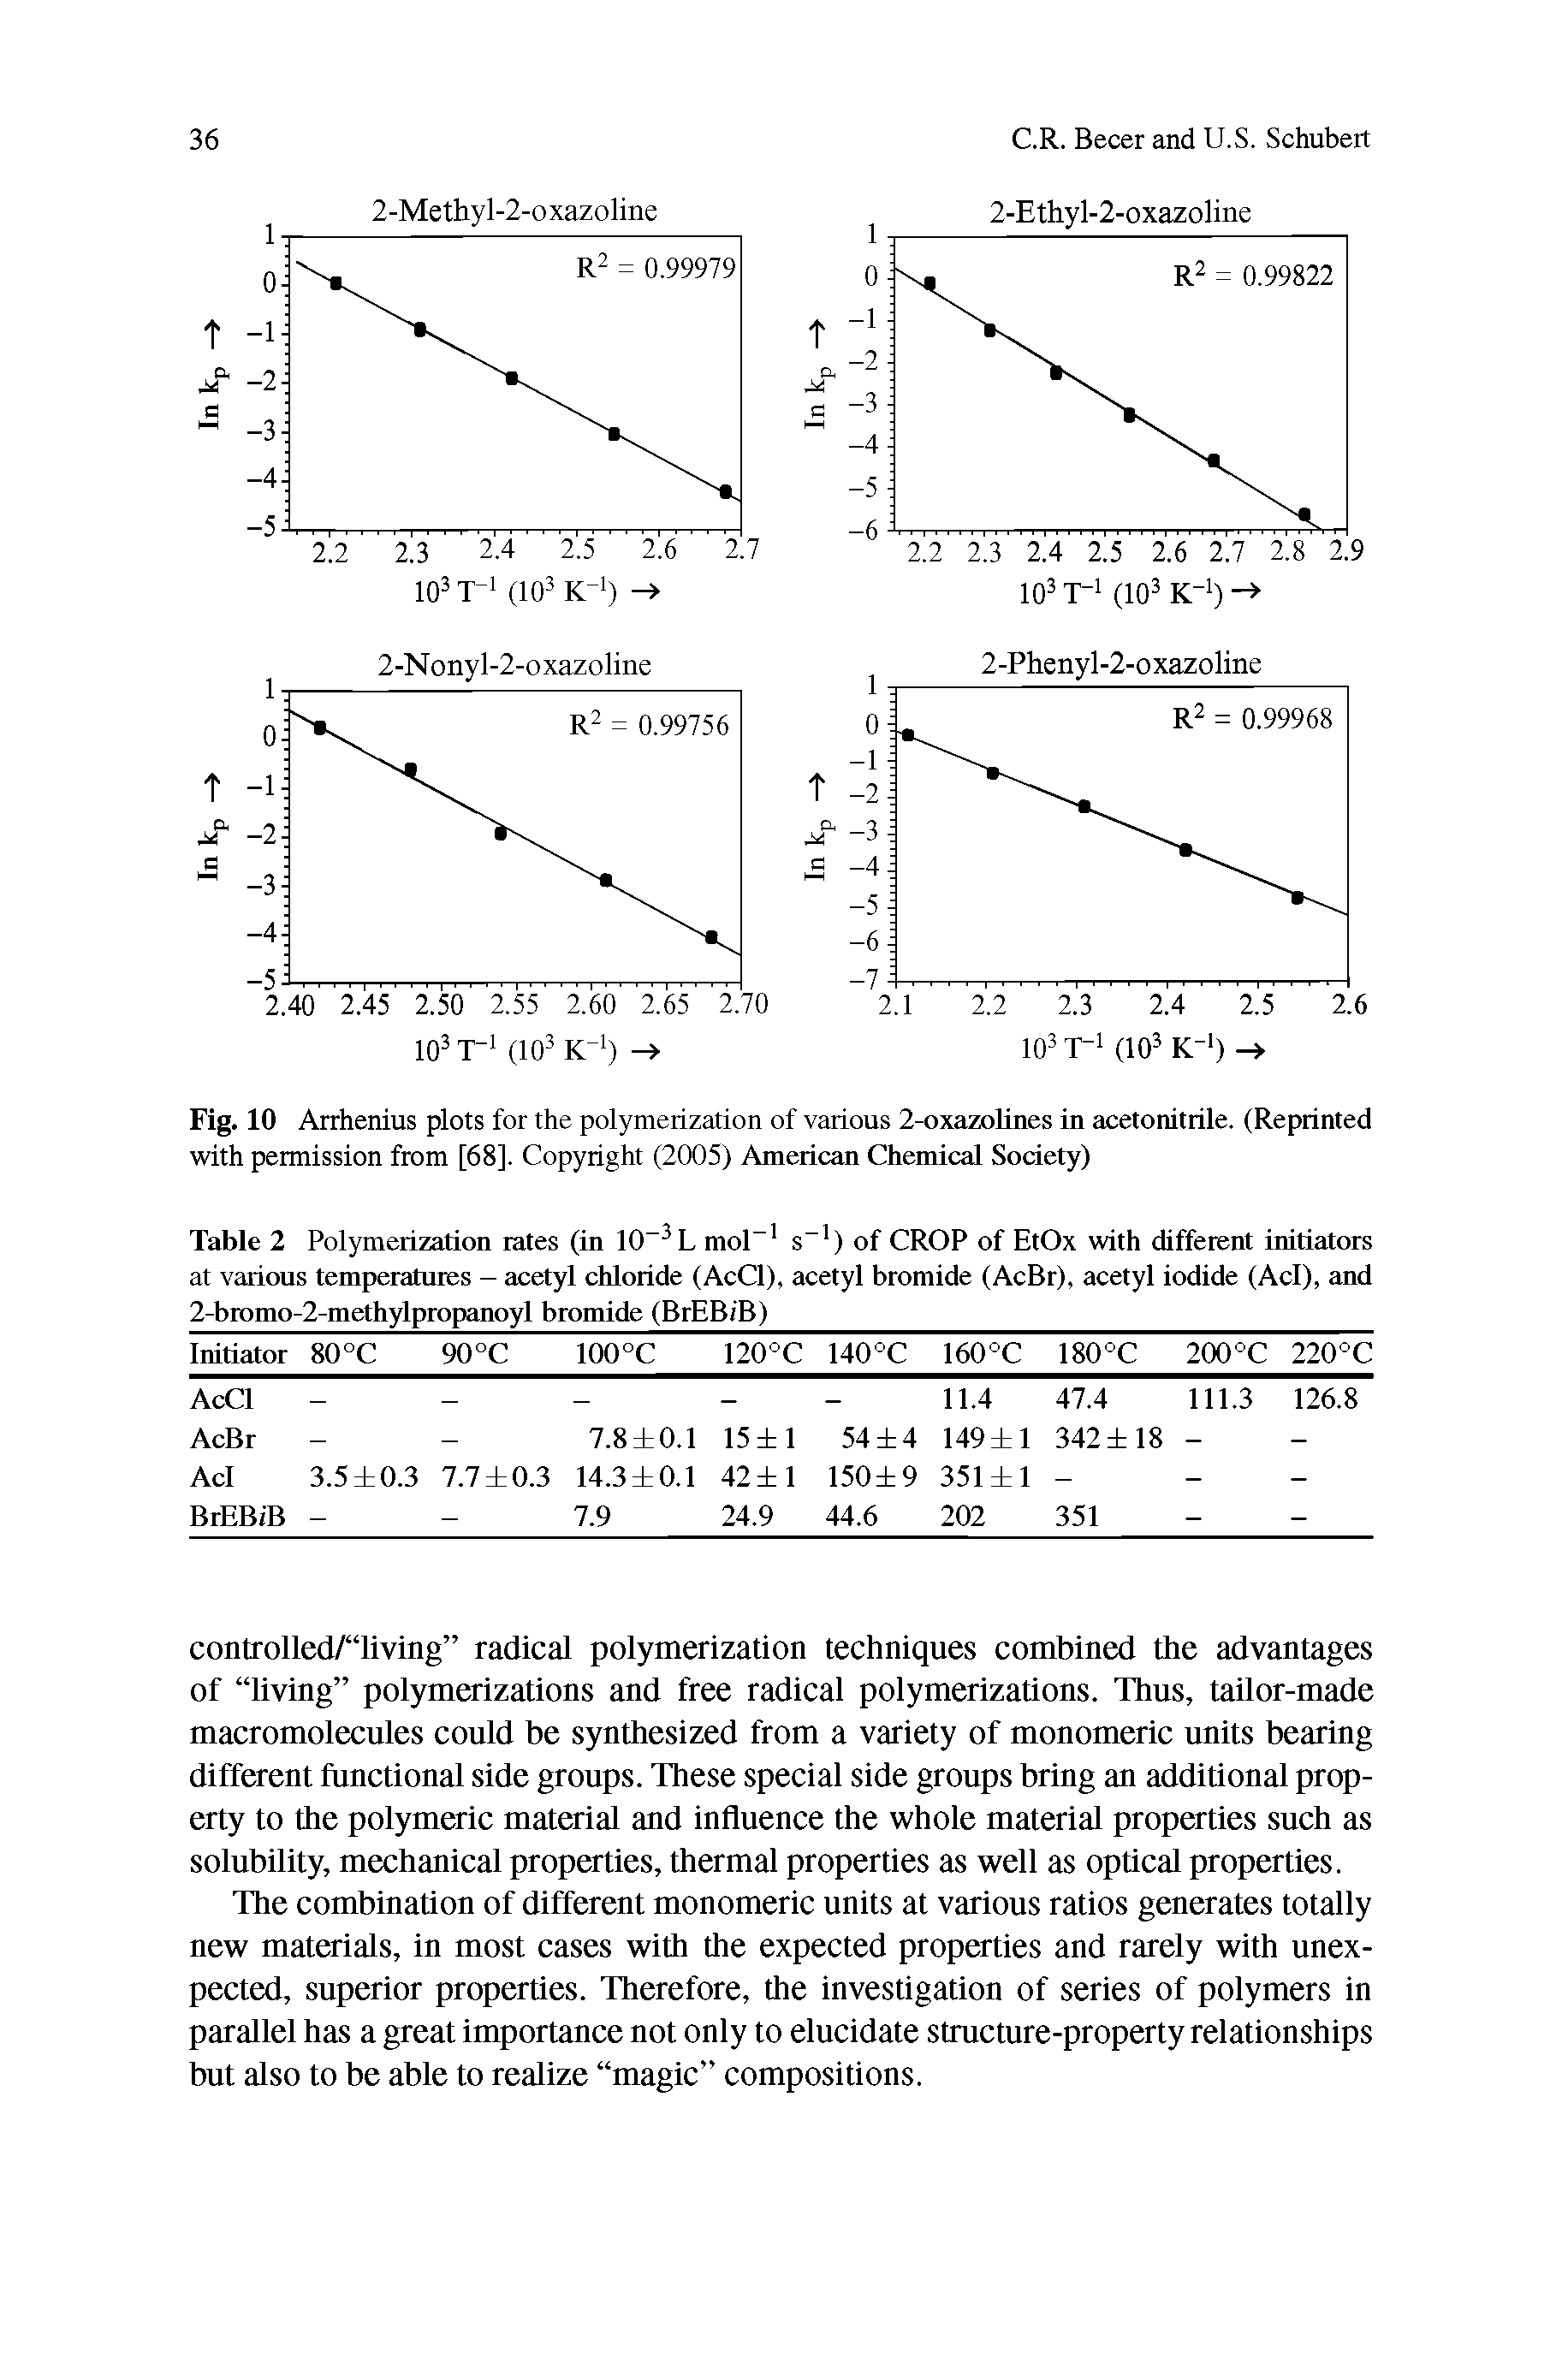 Fig. 10 Arrhenius plots for the polymerization of various 2-oxazolines in acetonitrile. (Reprinted with permission from [68]. Copyright (2005) American Chemical Society)...